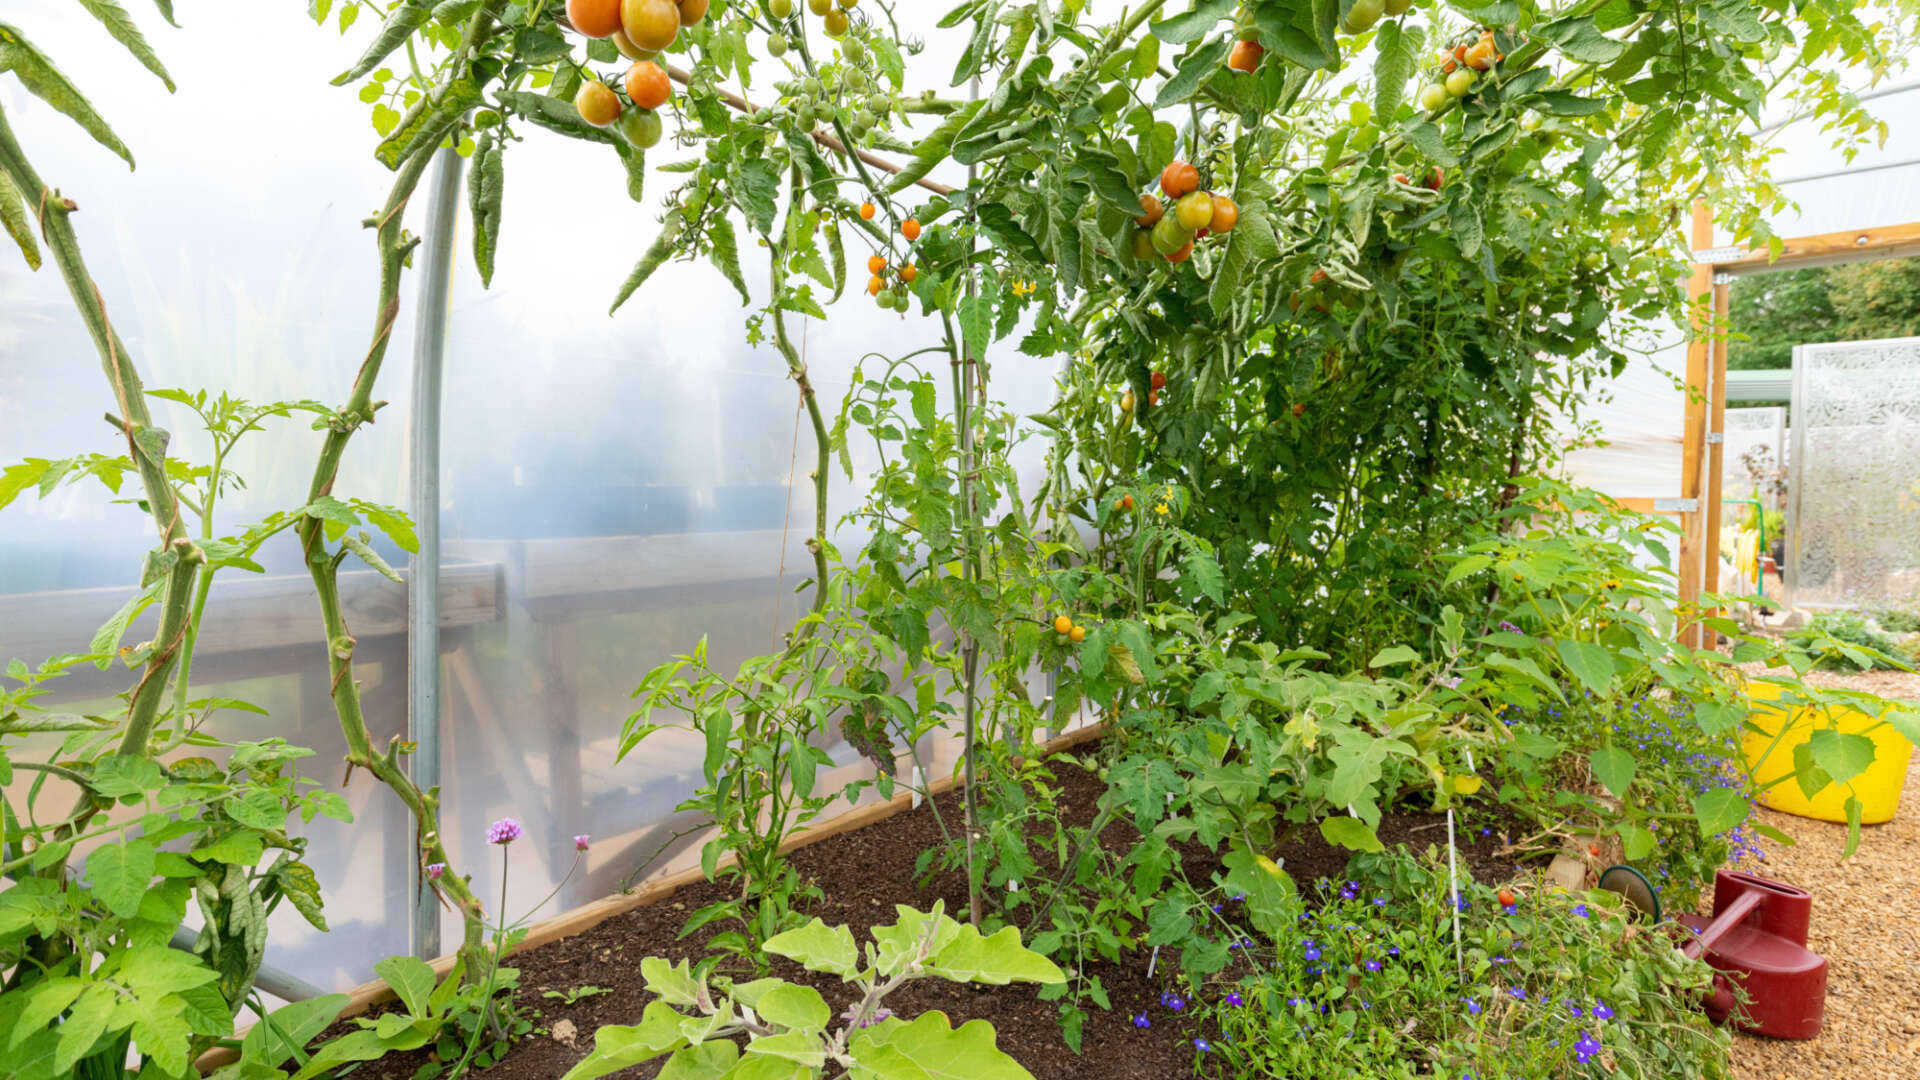 Tomatoes and flowers growing in polytunnel